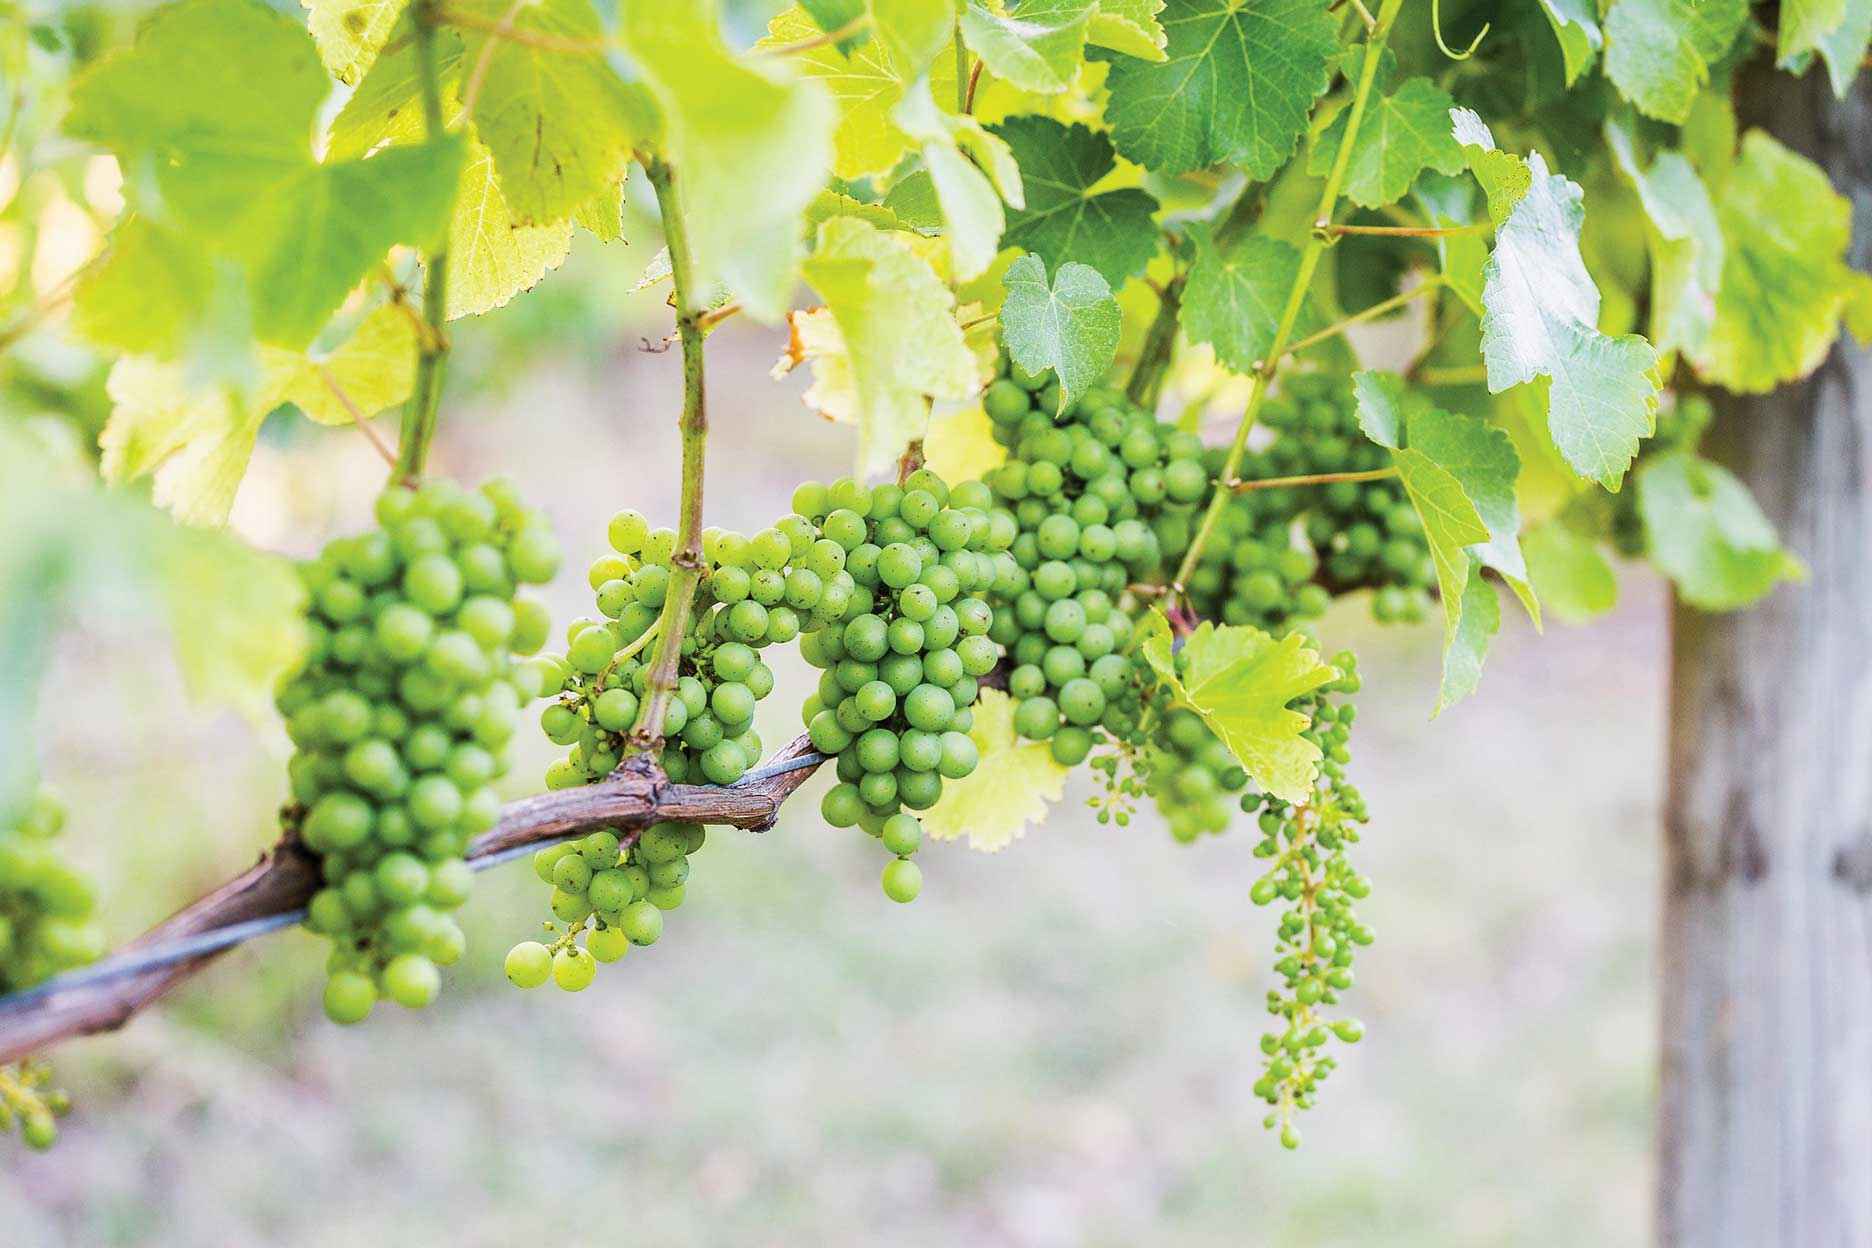 Grapes at Nazaaray Estate winery, Flinders. Winemakers are meticulous in their measurement of grape sugar content leading up to harvest. Their records demonstrate that wine grapes in Australia are ripening earlier.